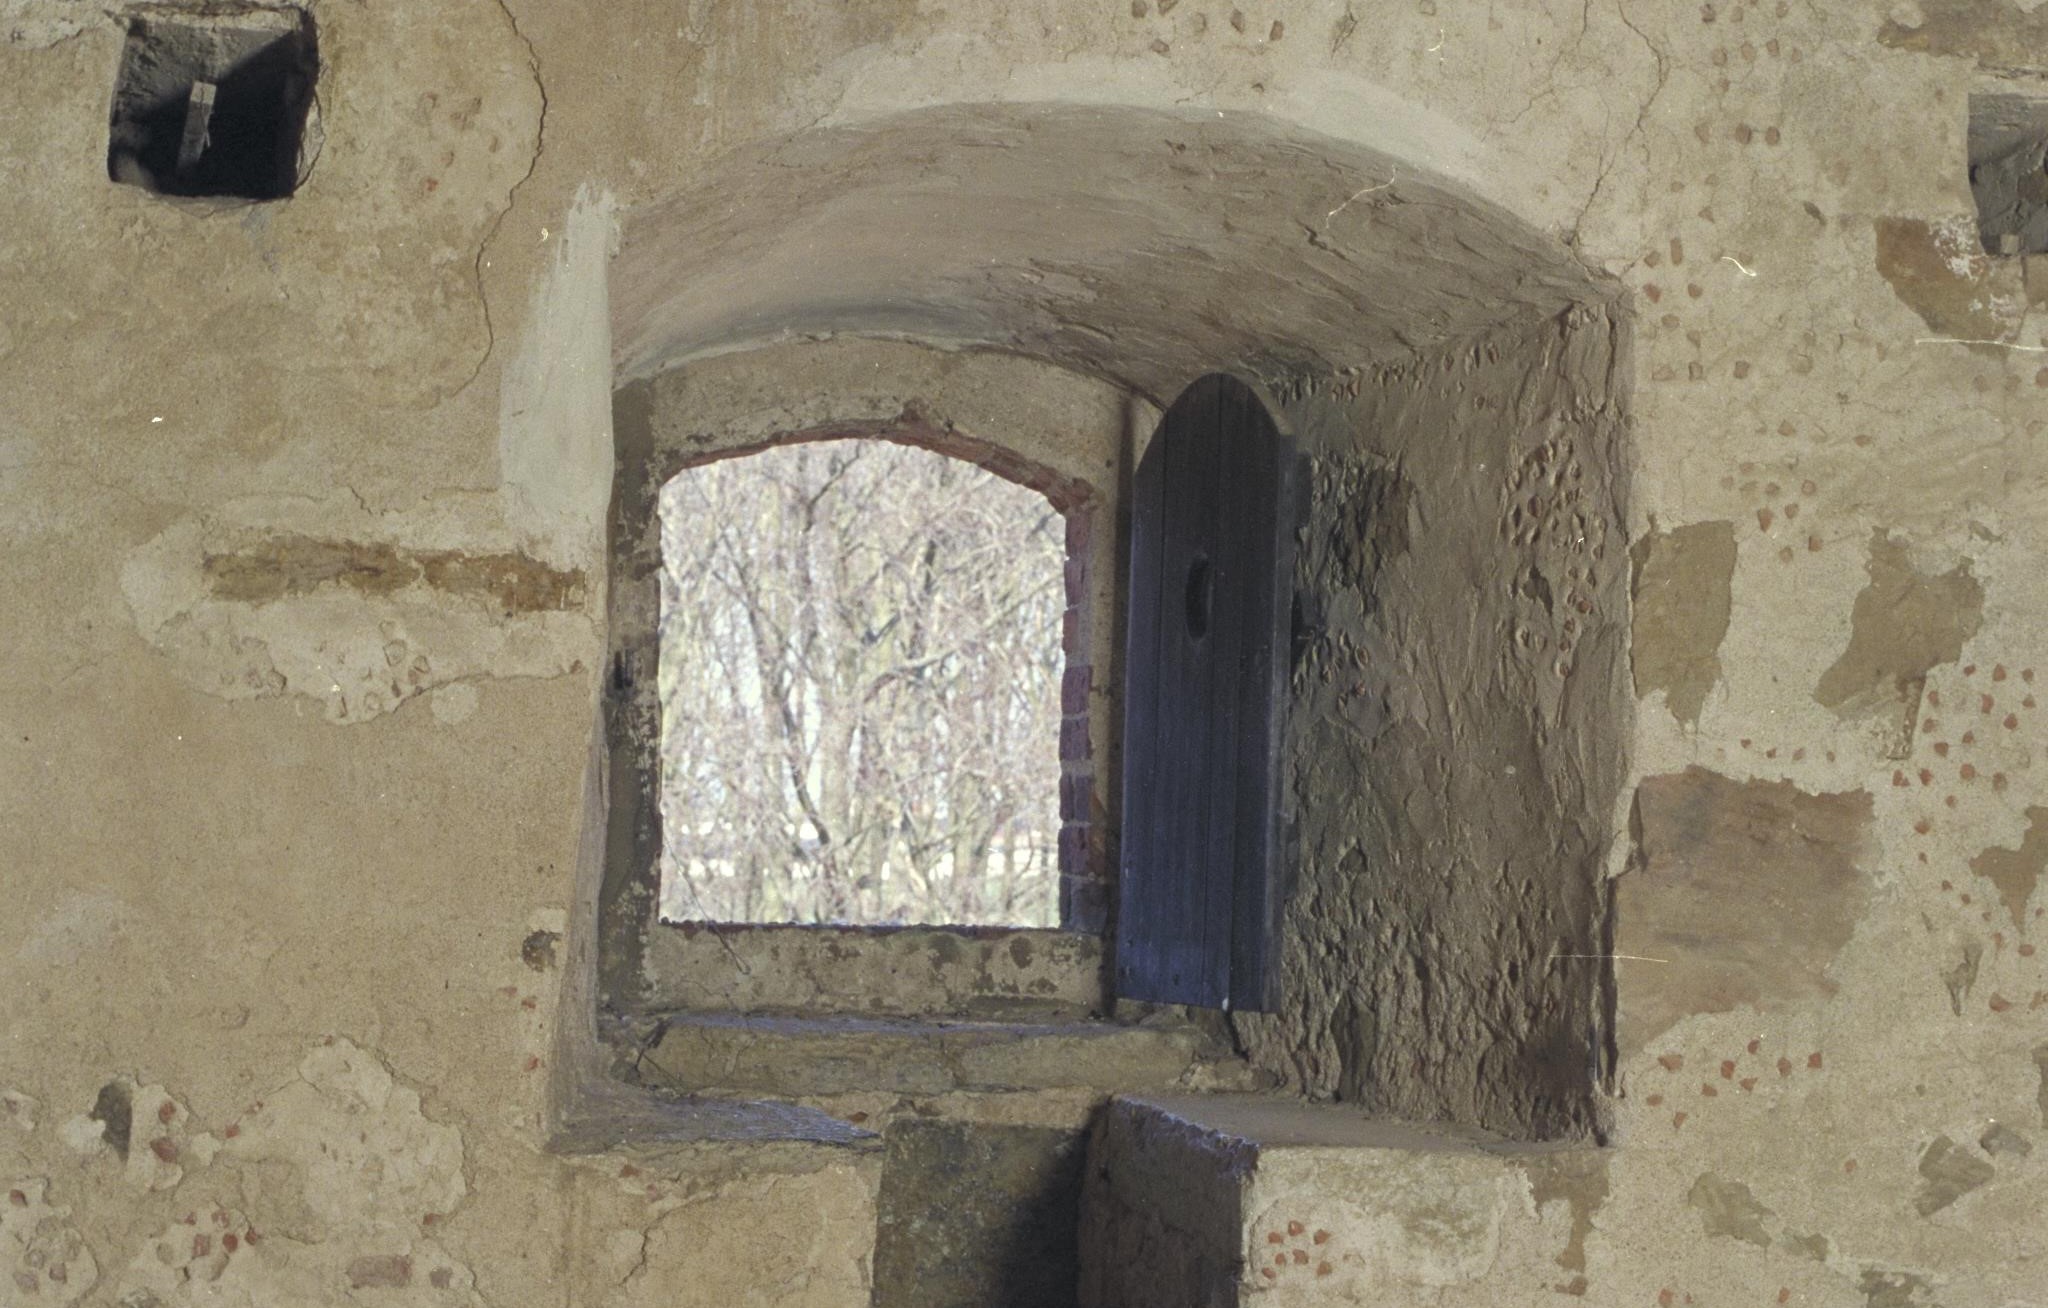 The picture shows a window niche with two stone seats. Above you can see part of the truss' beams.